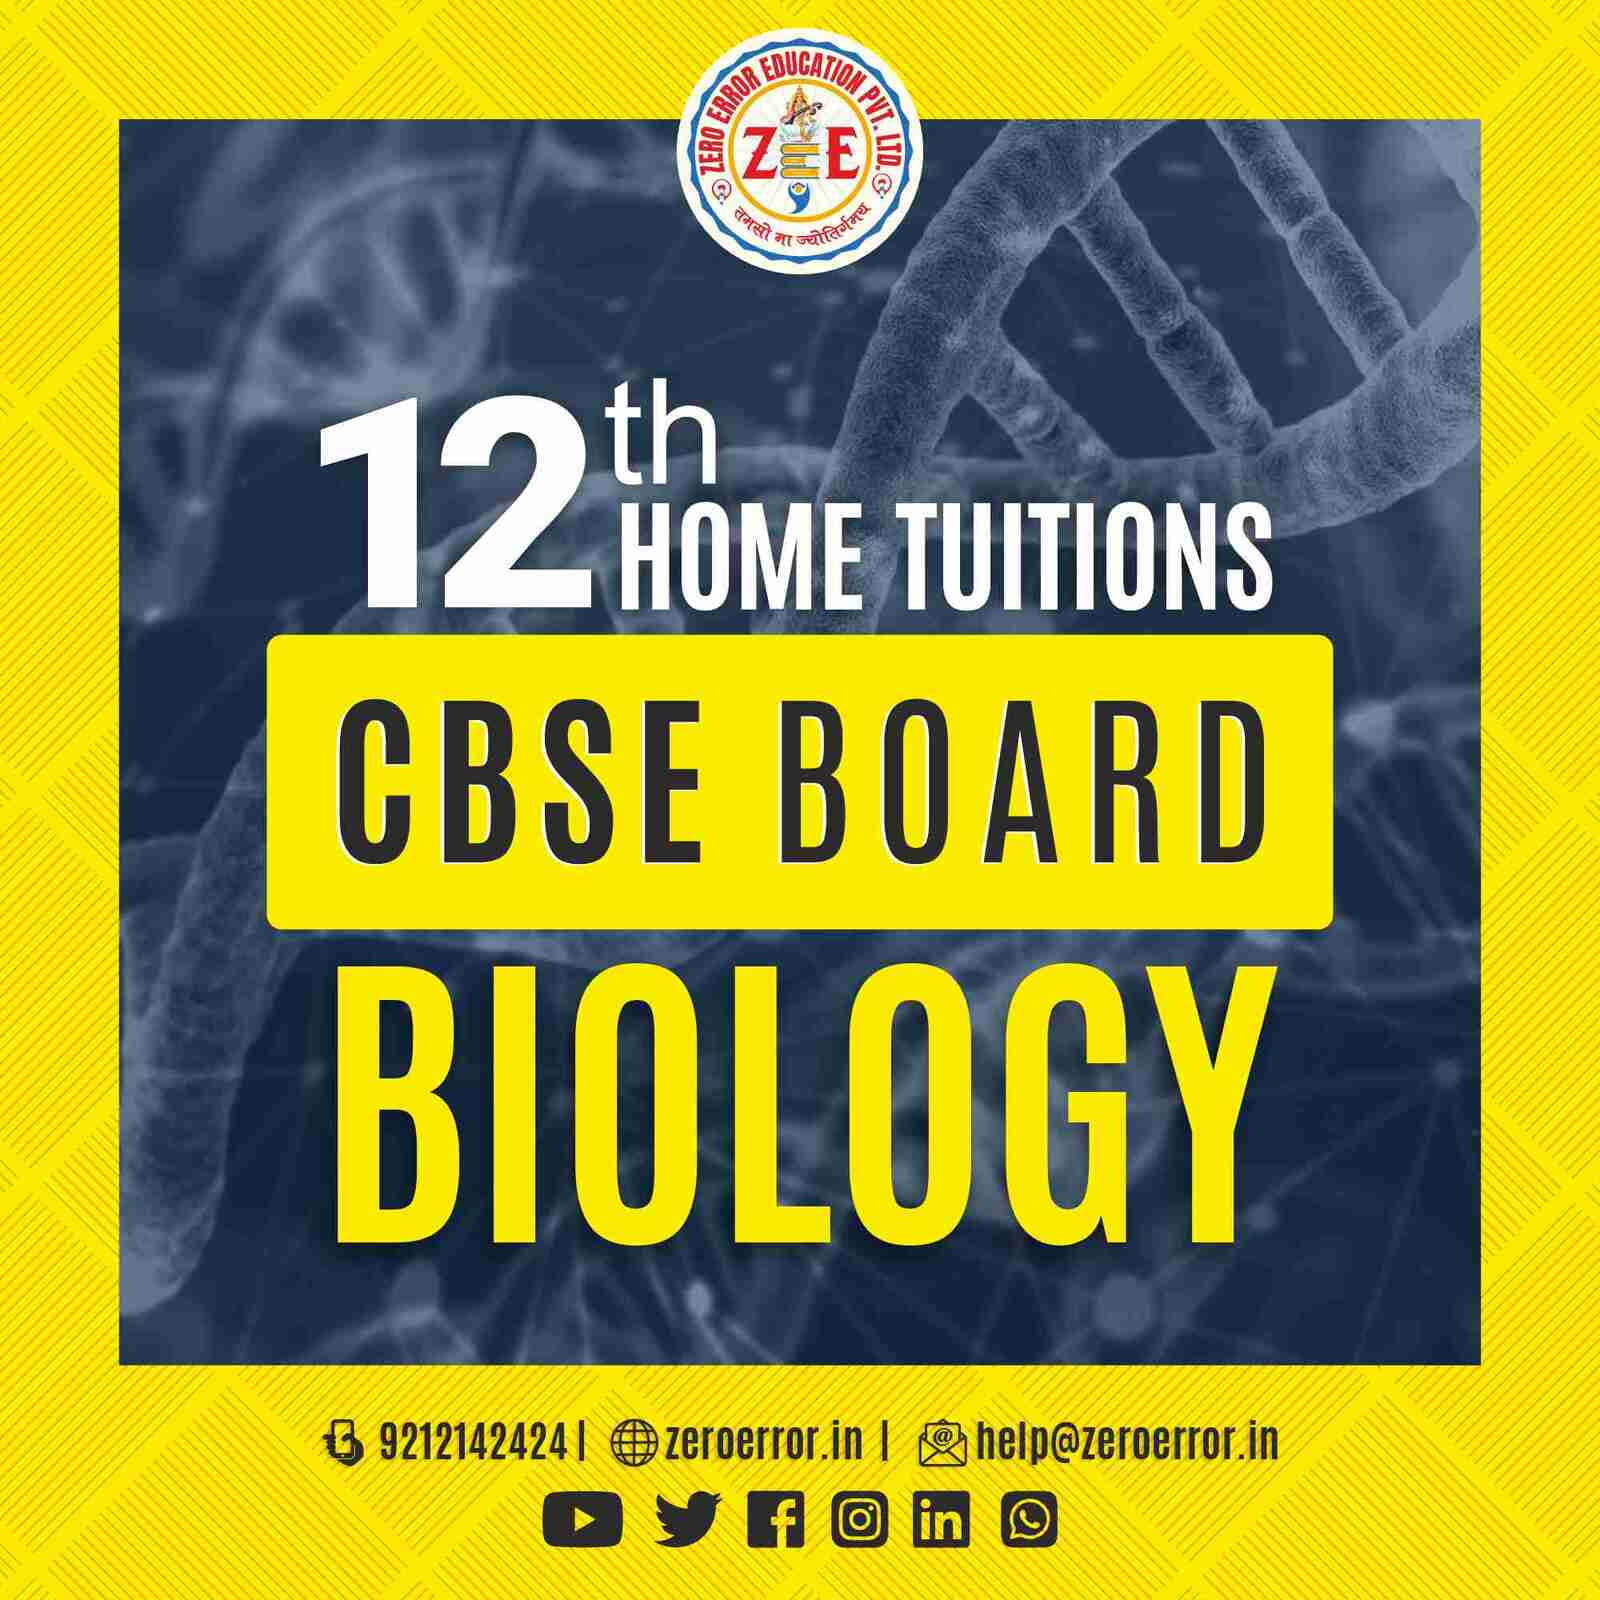 12th Grade CBSE Biology Online Classes by Zero Error Education Prepare for your CBSE board exams with online and offline Biology classes for 12th grade. Learn from experienced home tutors and get all the help you need to succeed. Enroll today at Zero Error Education. [https://zeroerror.in/] Call 9212142424 for more information.